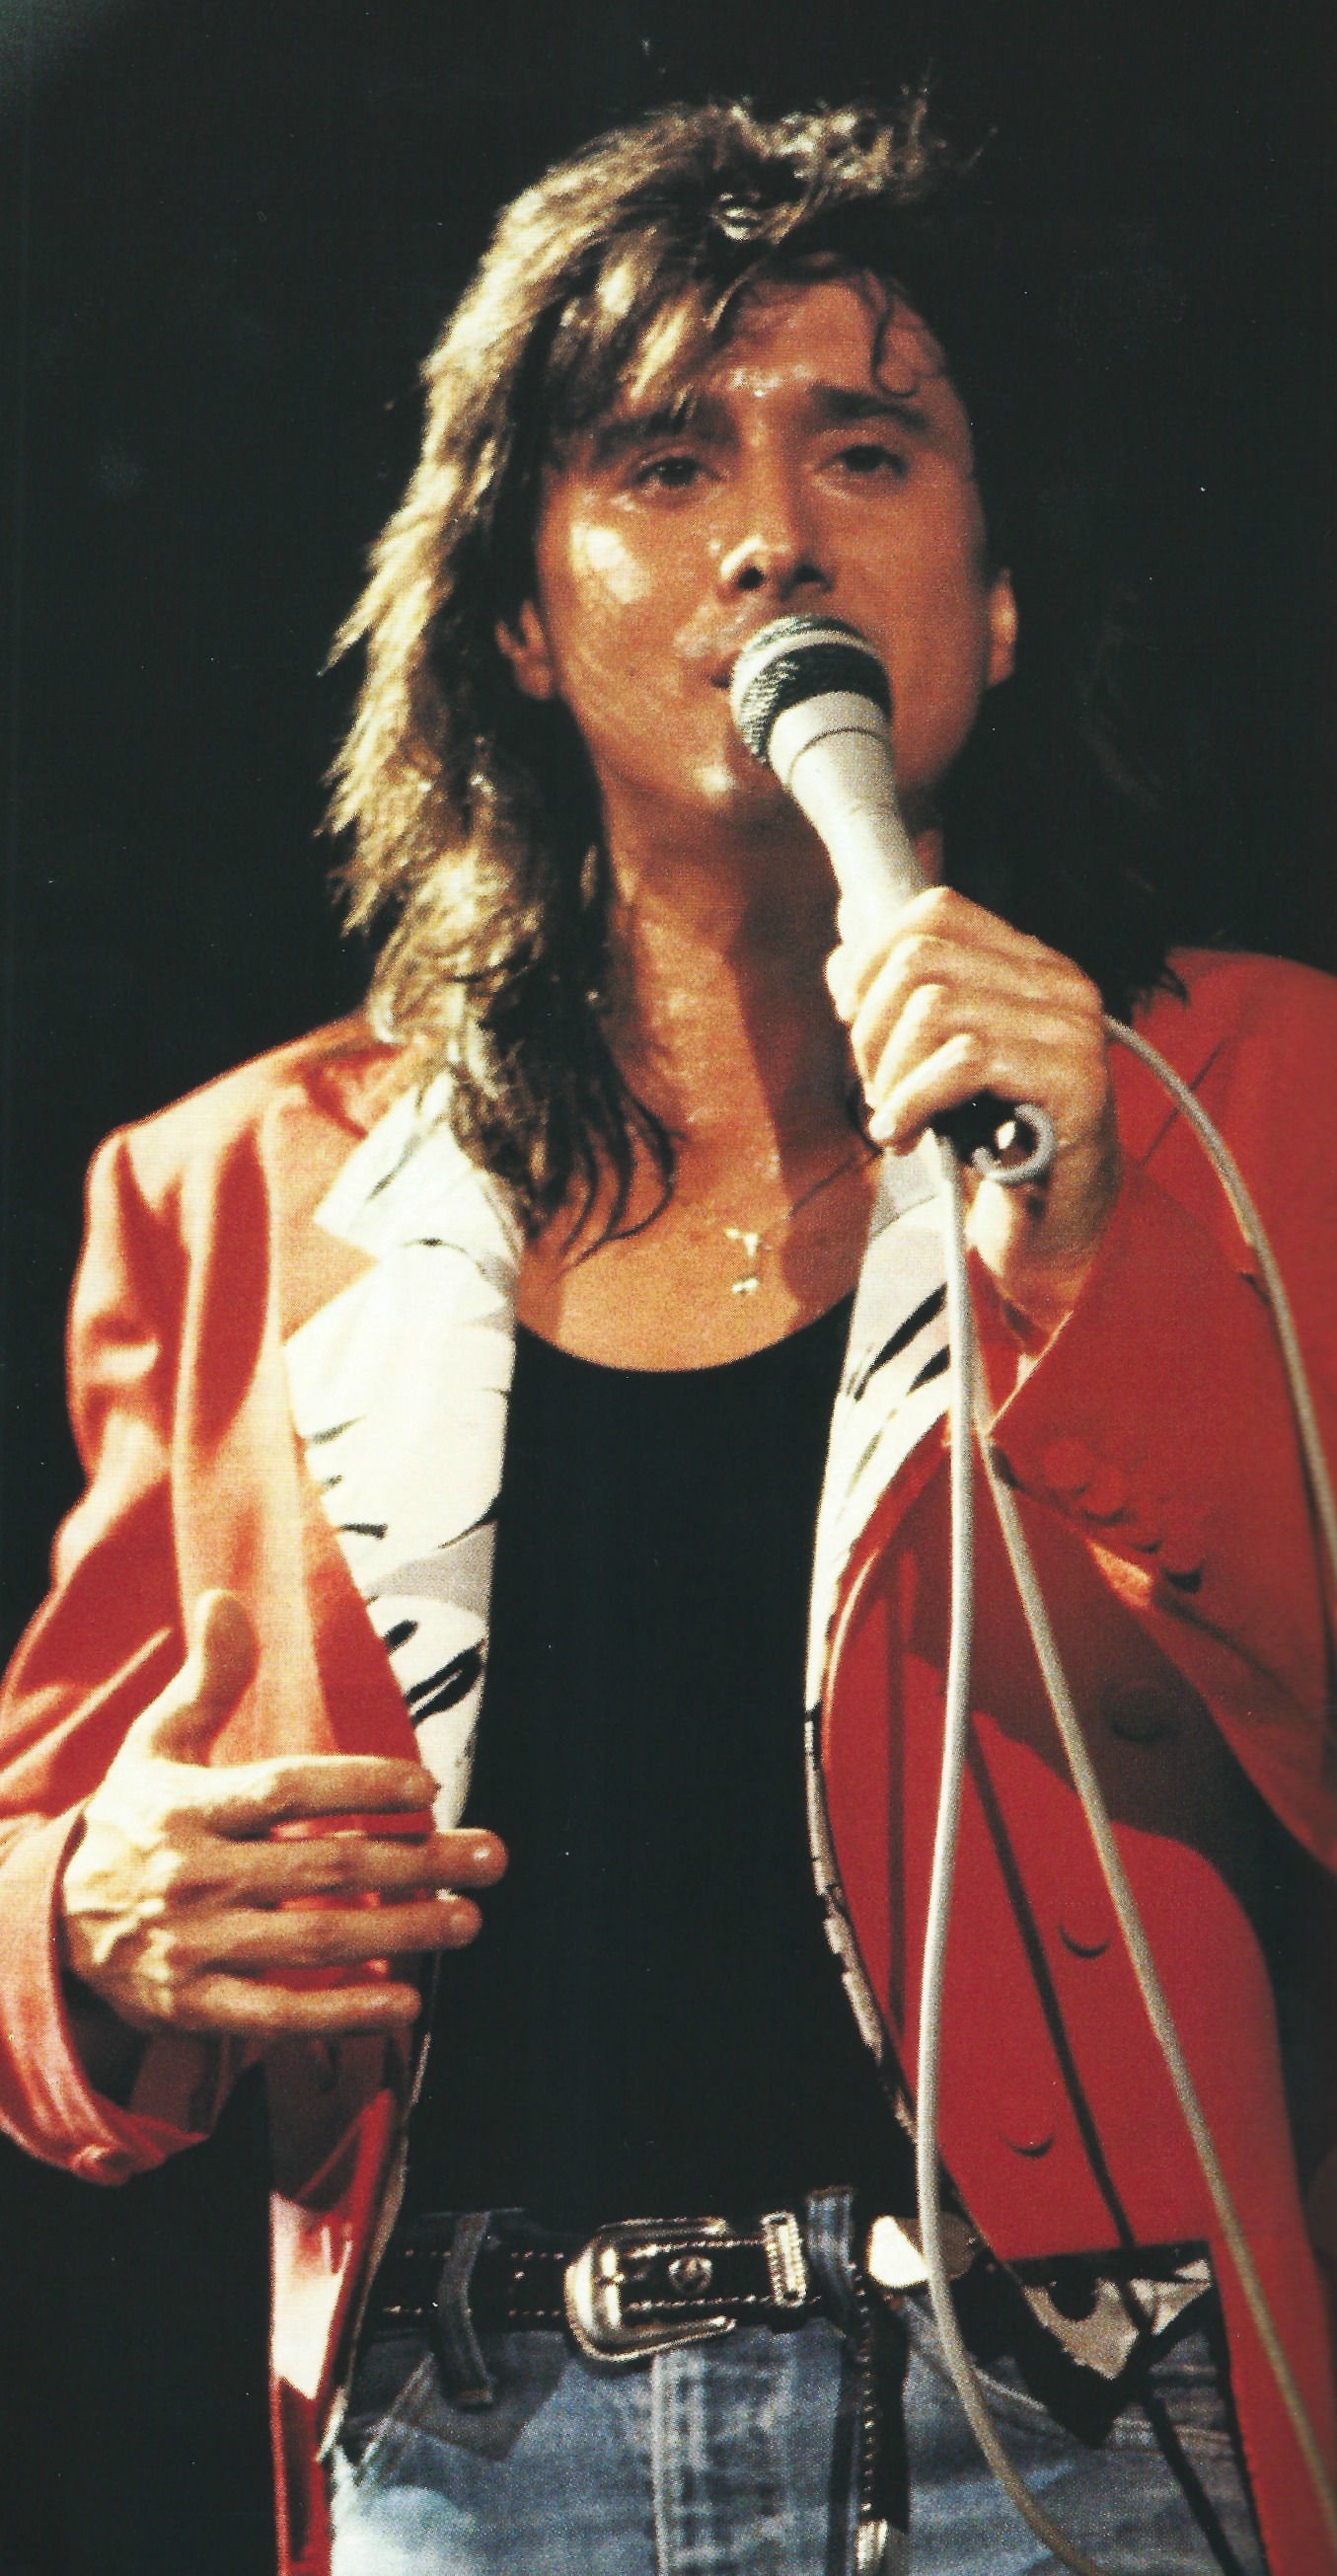 steve perry's first performance with journey